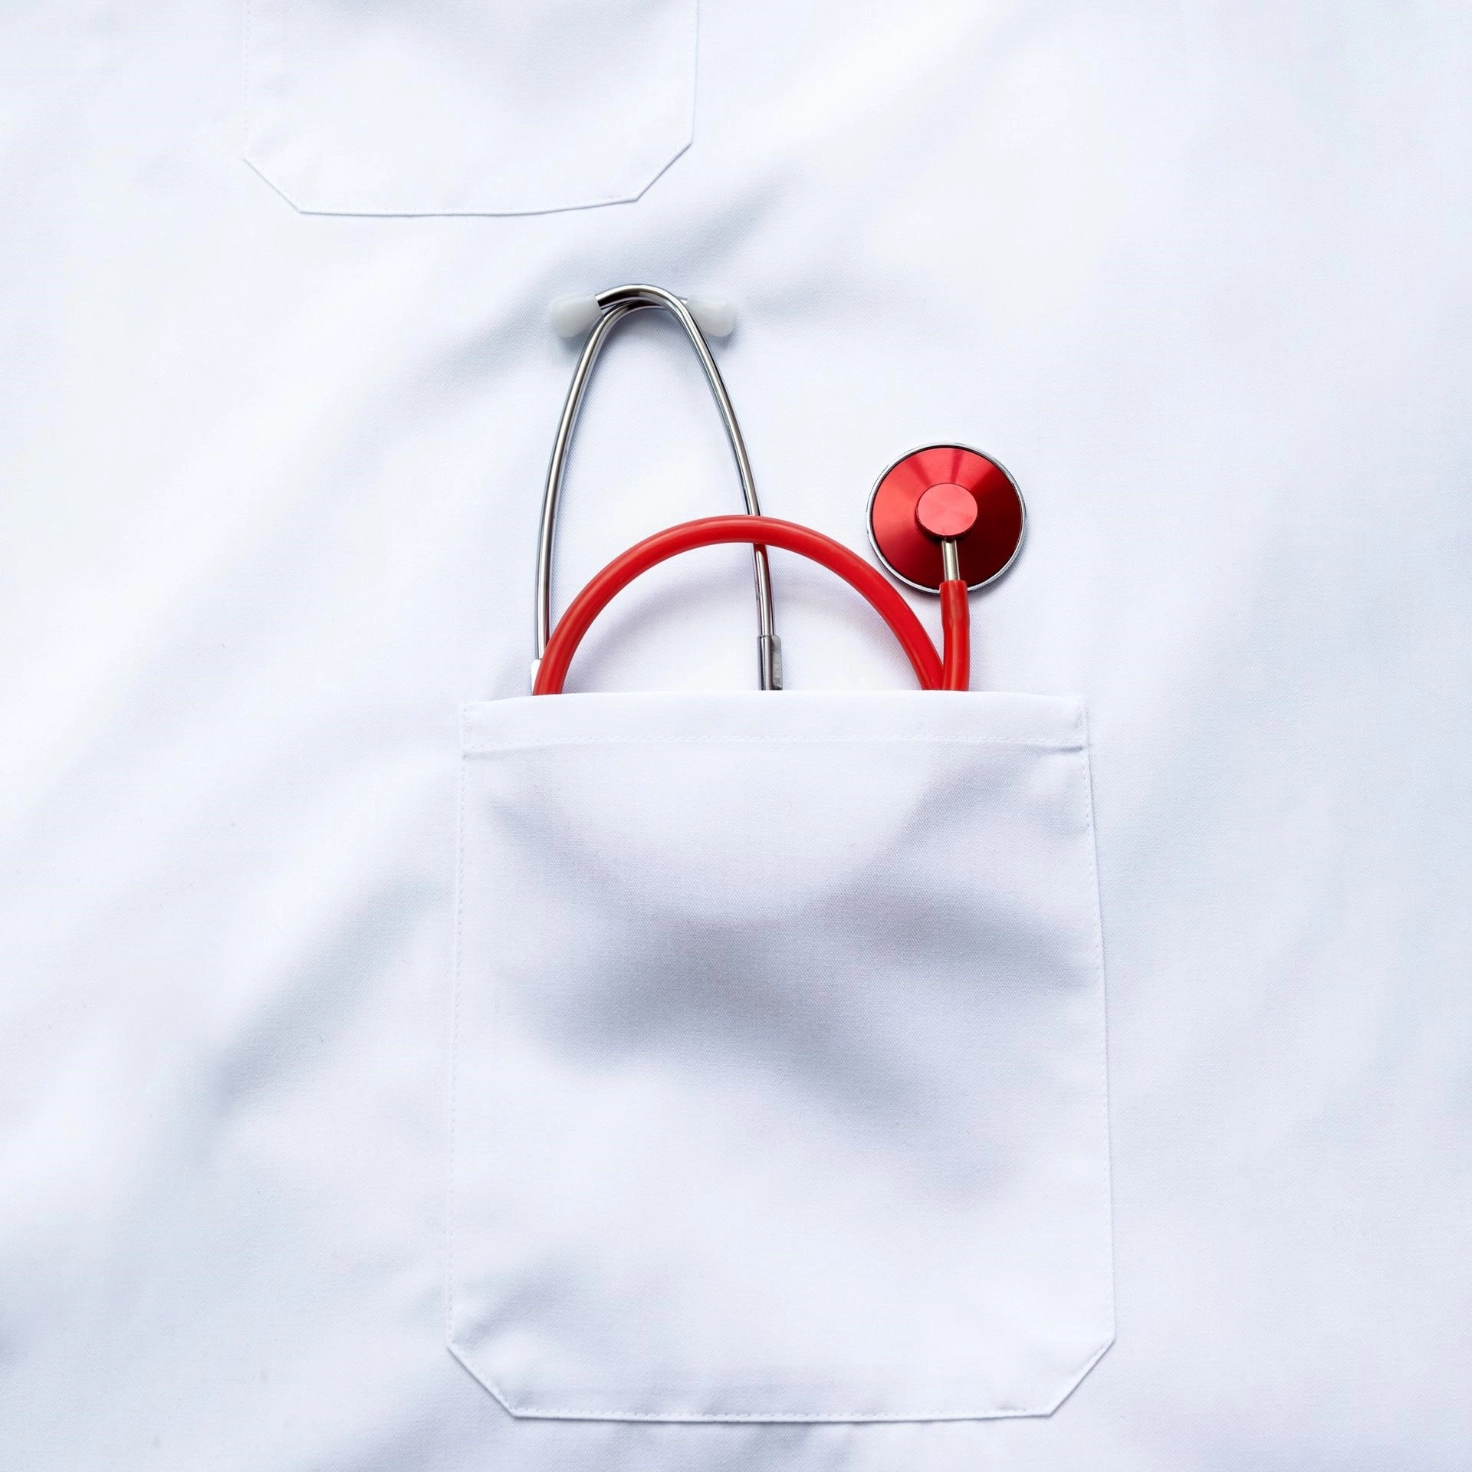 A stethoscope protrudes from the breast pocket of a doctor's coat.